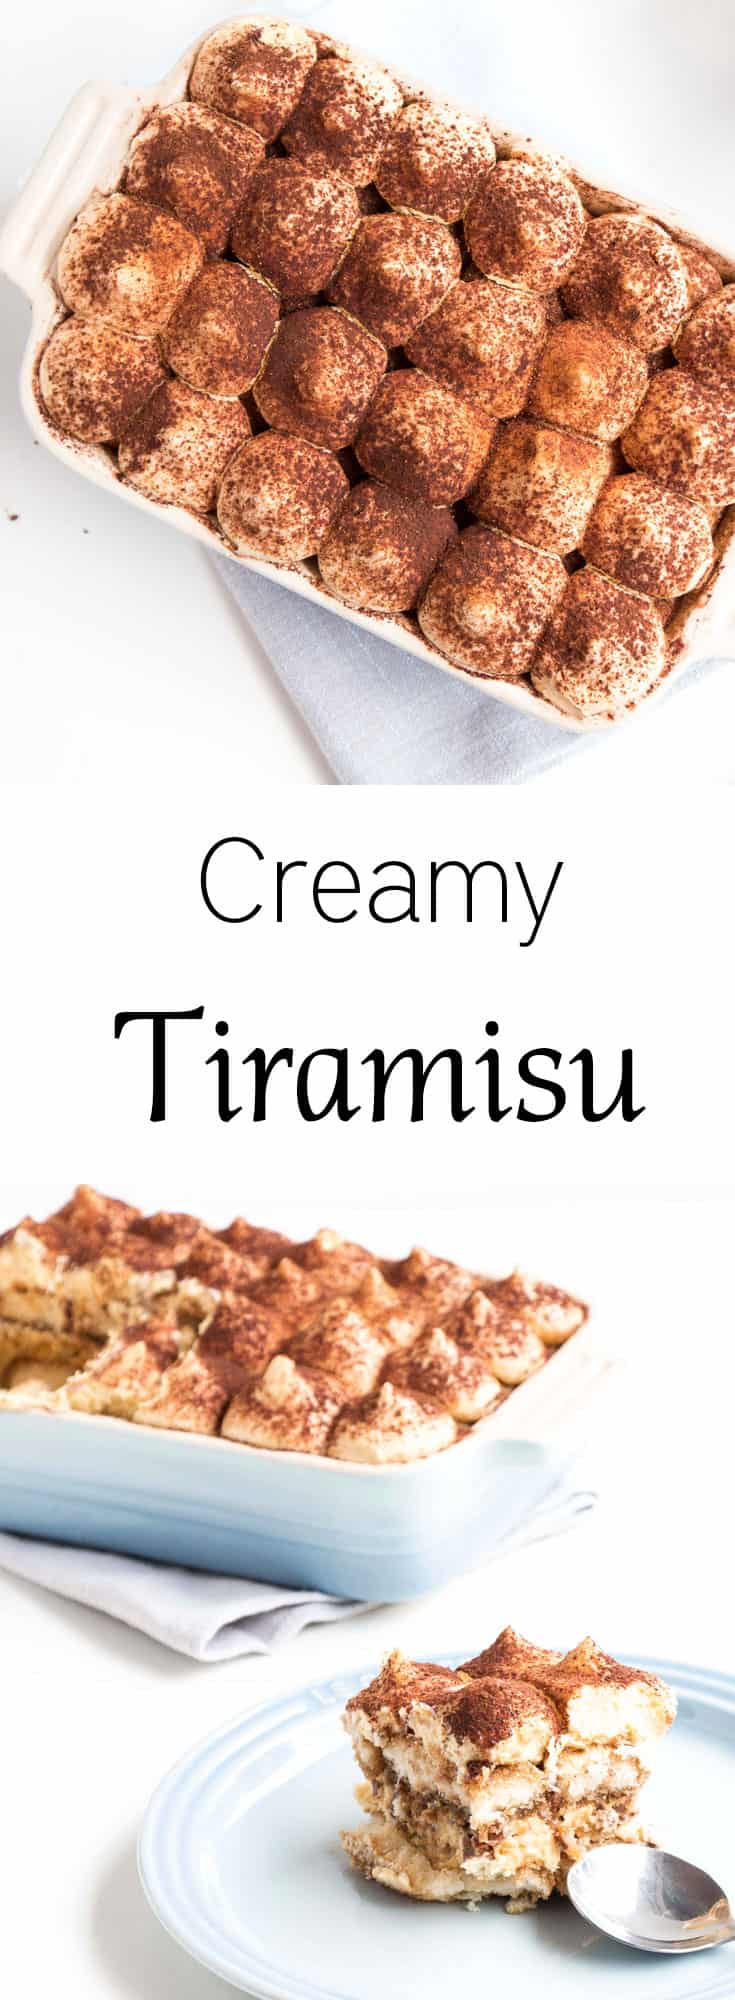 Creamy Tiramisu - A delicious dessert that is simply decadent and creamy. With soft flavours of coffee and chocolate this easy to make dessert will win over anyones heart.